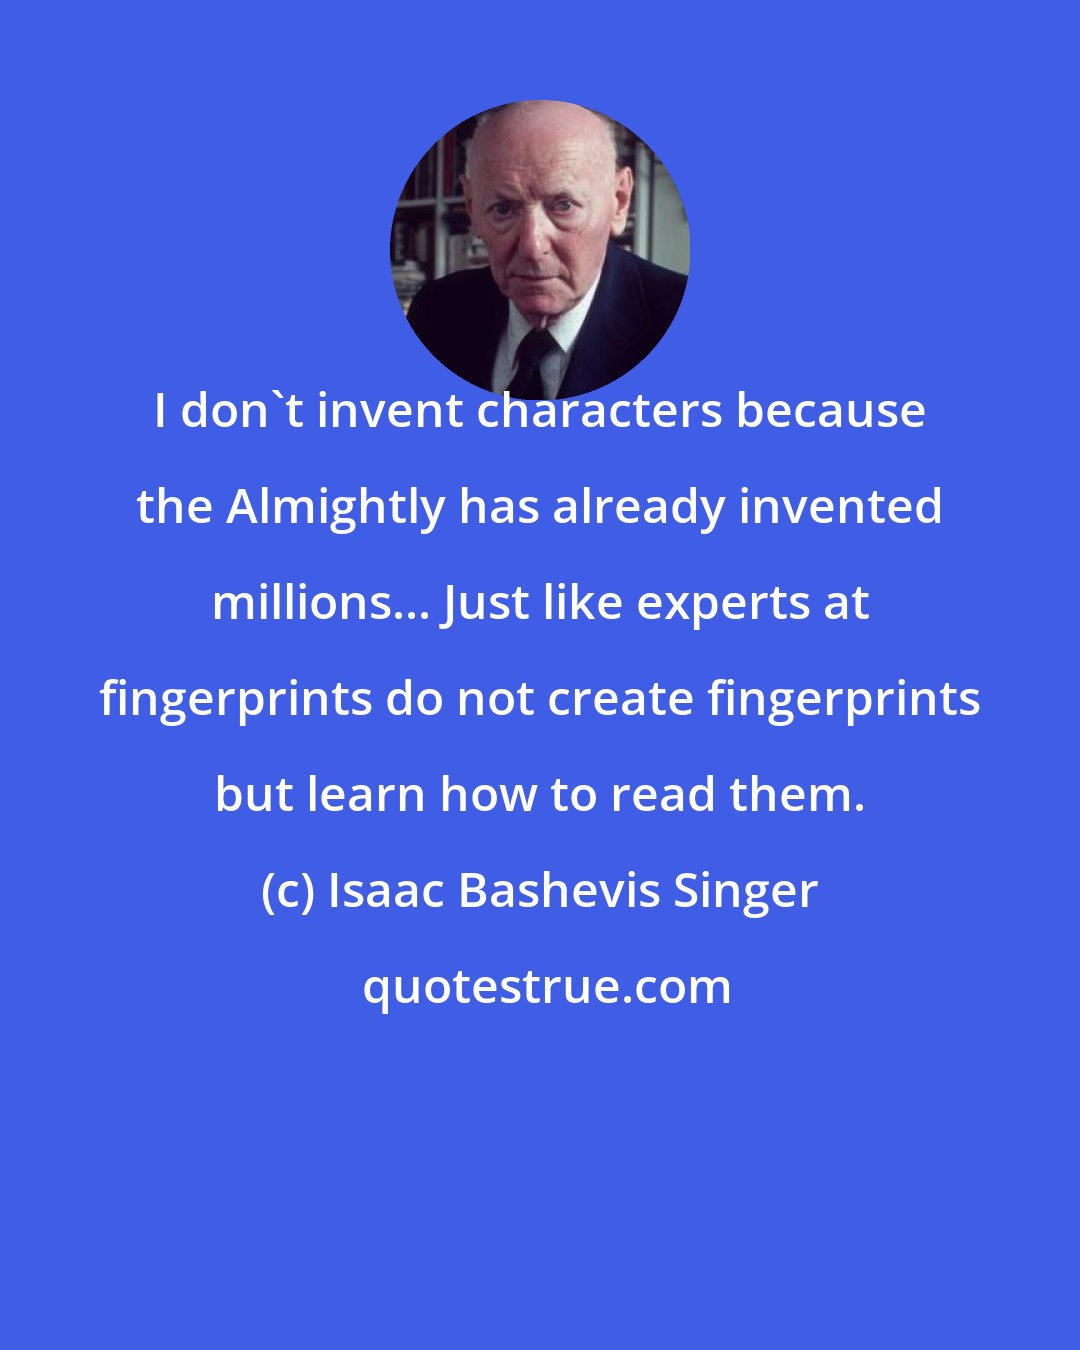 Isaac Bashevis Singer: I don't invent characters because the Almightly has already invented millions... Just like experts at fingerprints do not create fingerprints but learn how to read them.